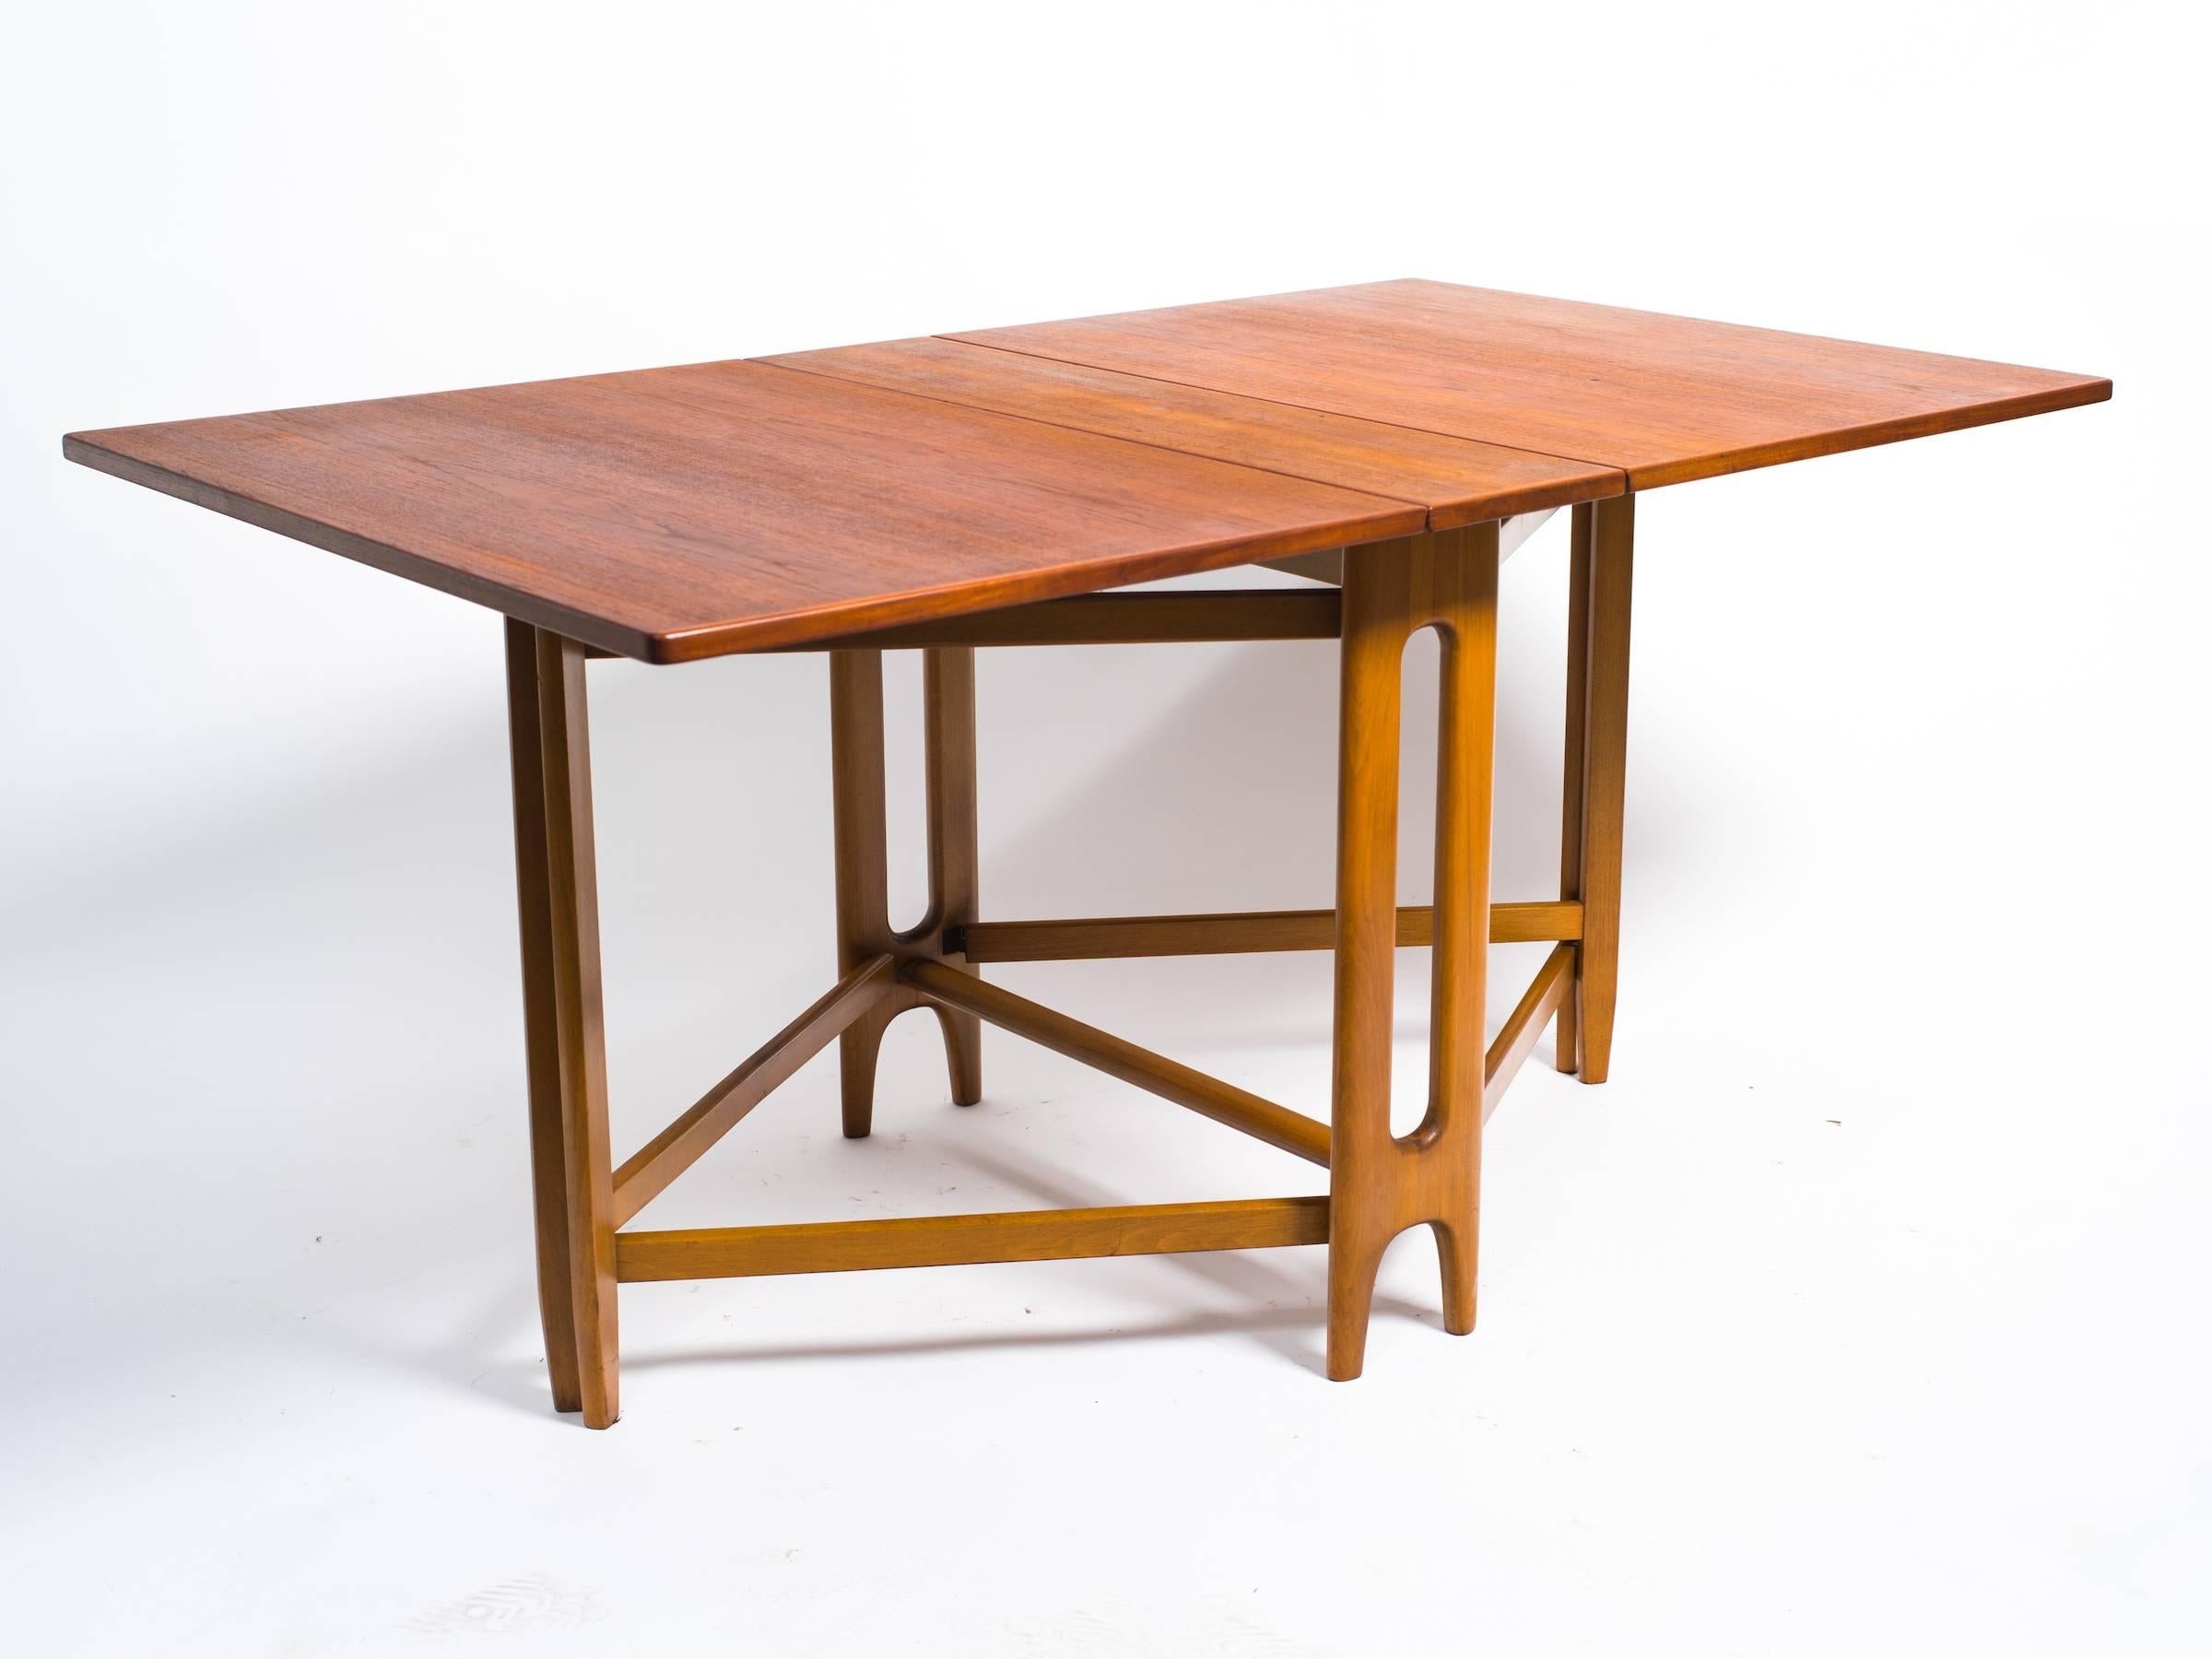 1970s teak Danish extension table

Dimensions listed are with table closed. When fully extended. Measures: Depth is 58 inches.